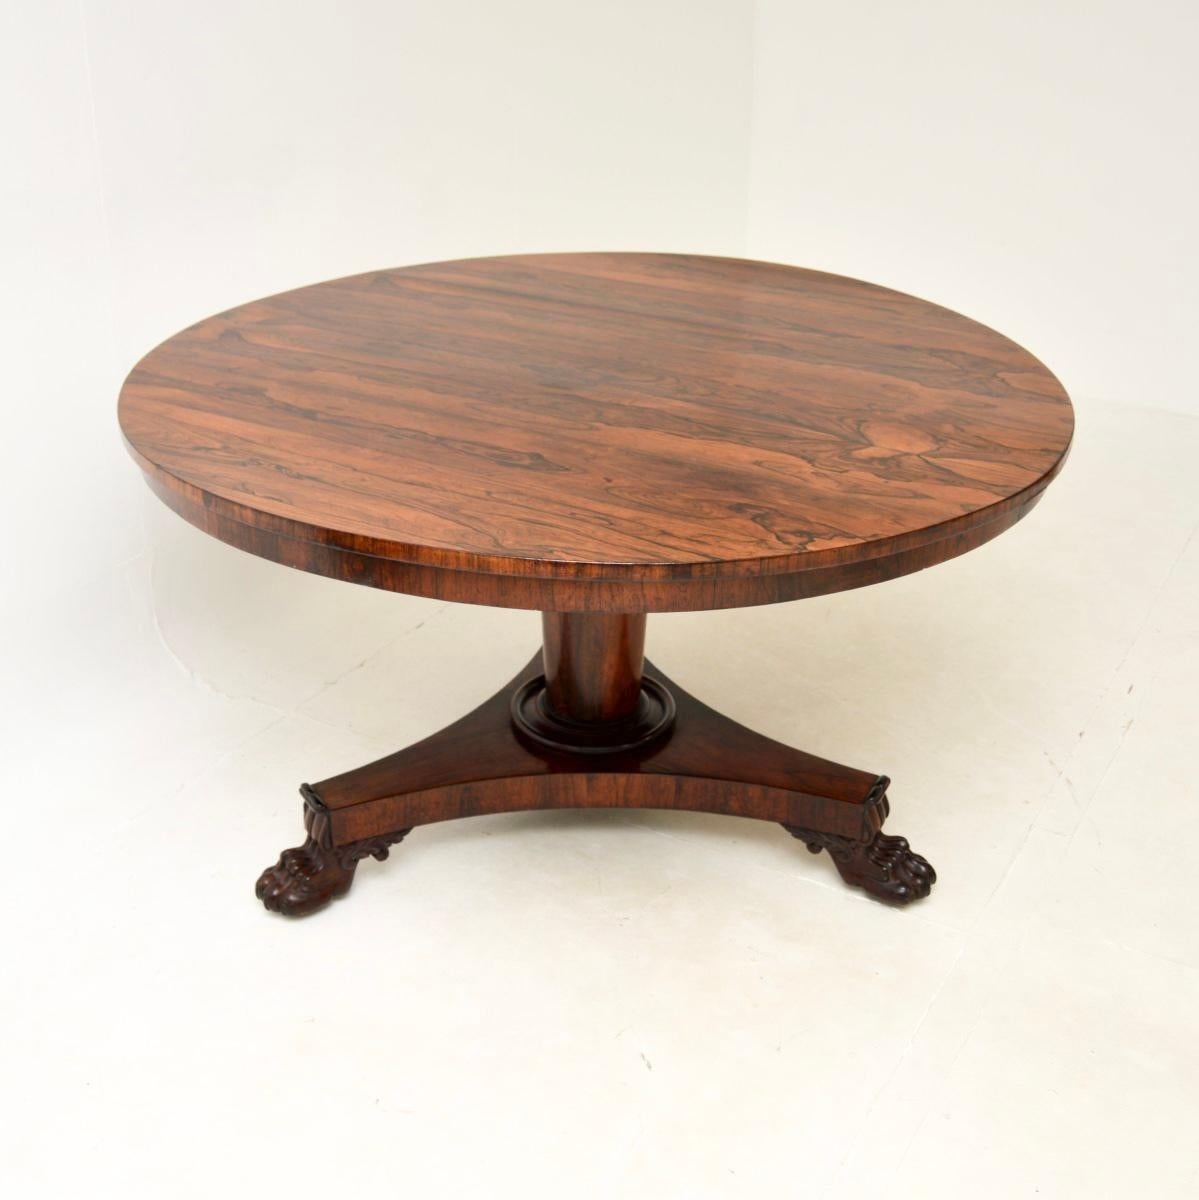 A stunning antique William IV tilt top dining table. This was made in England, it dates from around the 1830-1850 period.

It is of extremely fine quality, with absolutely beautiful grain patterns throughout, particularly on the top. The round top